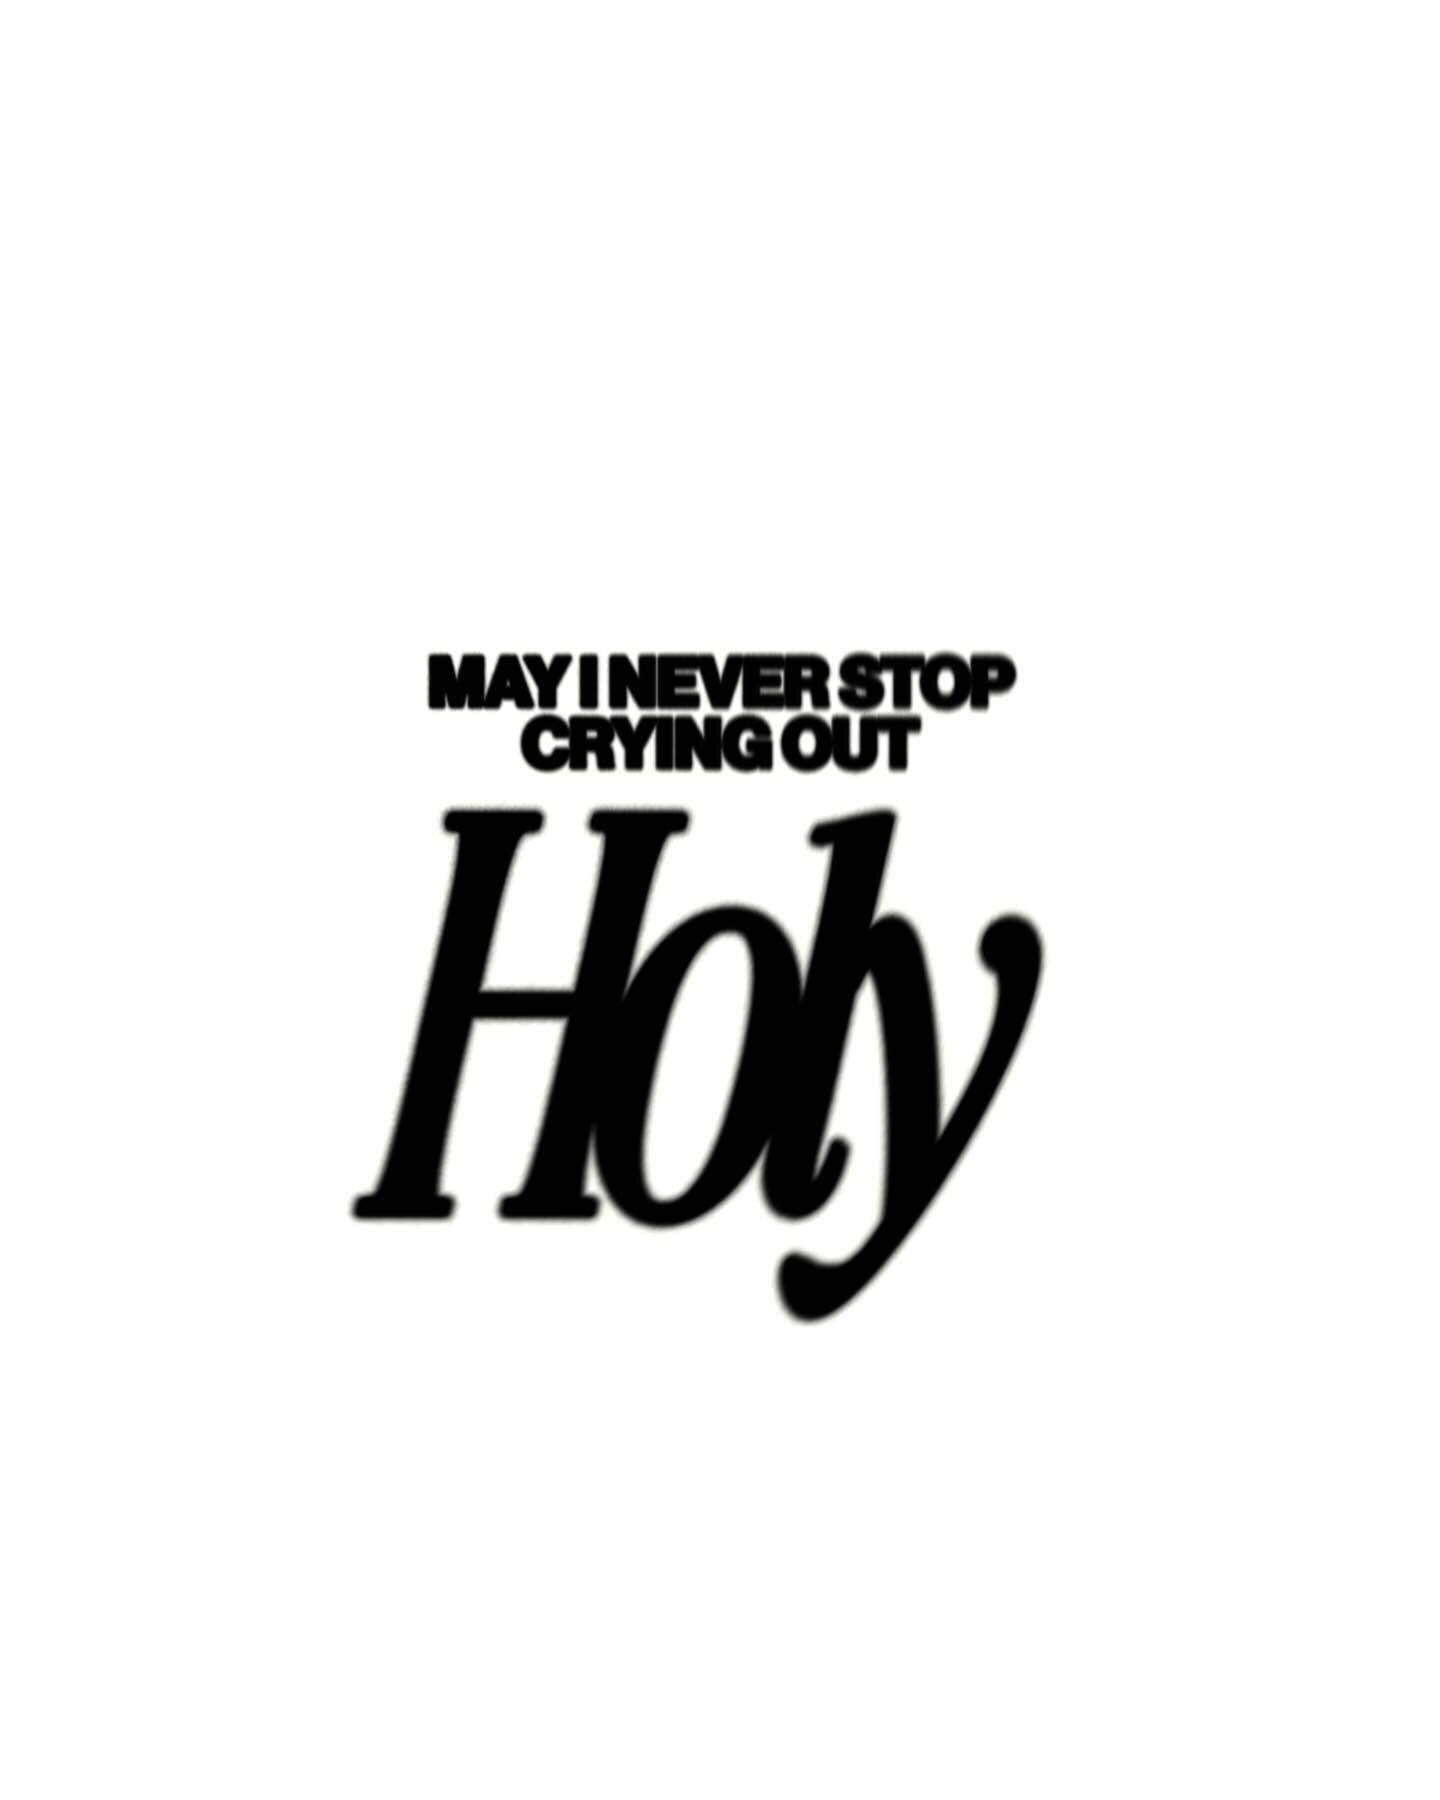 &ldquo;May I Never&rdquo;

#christiandesign #holy #worthy 
#graphicdesign